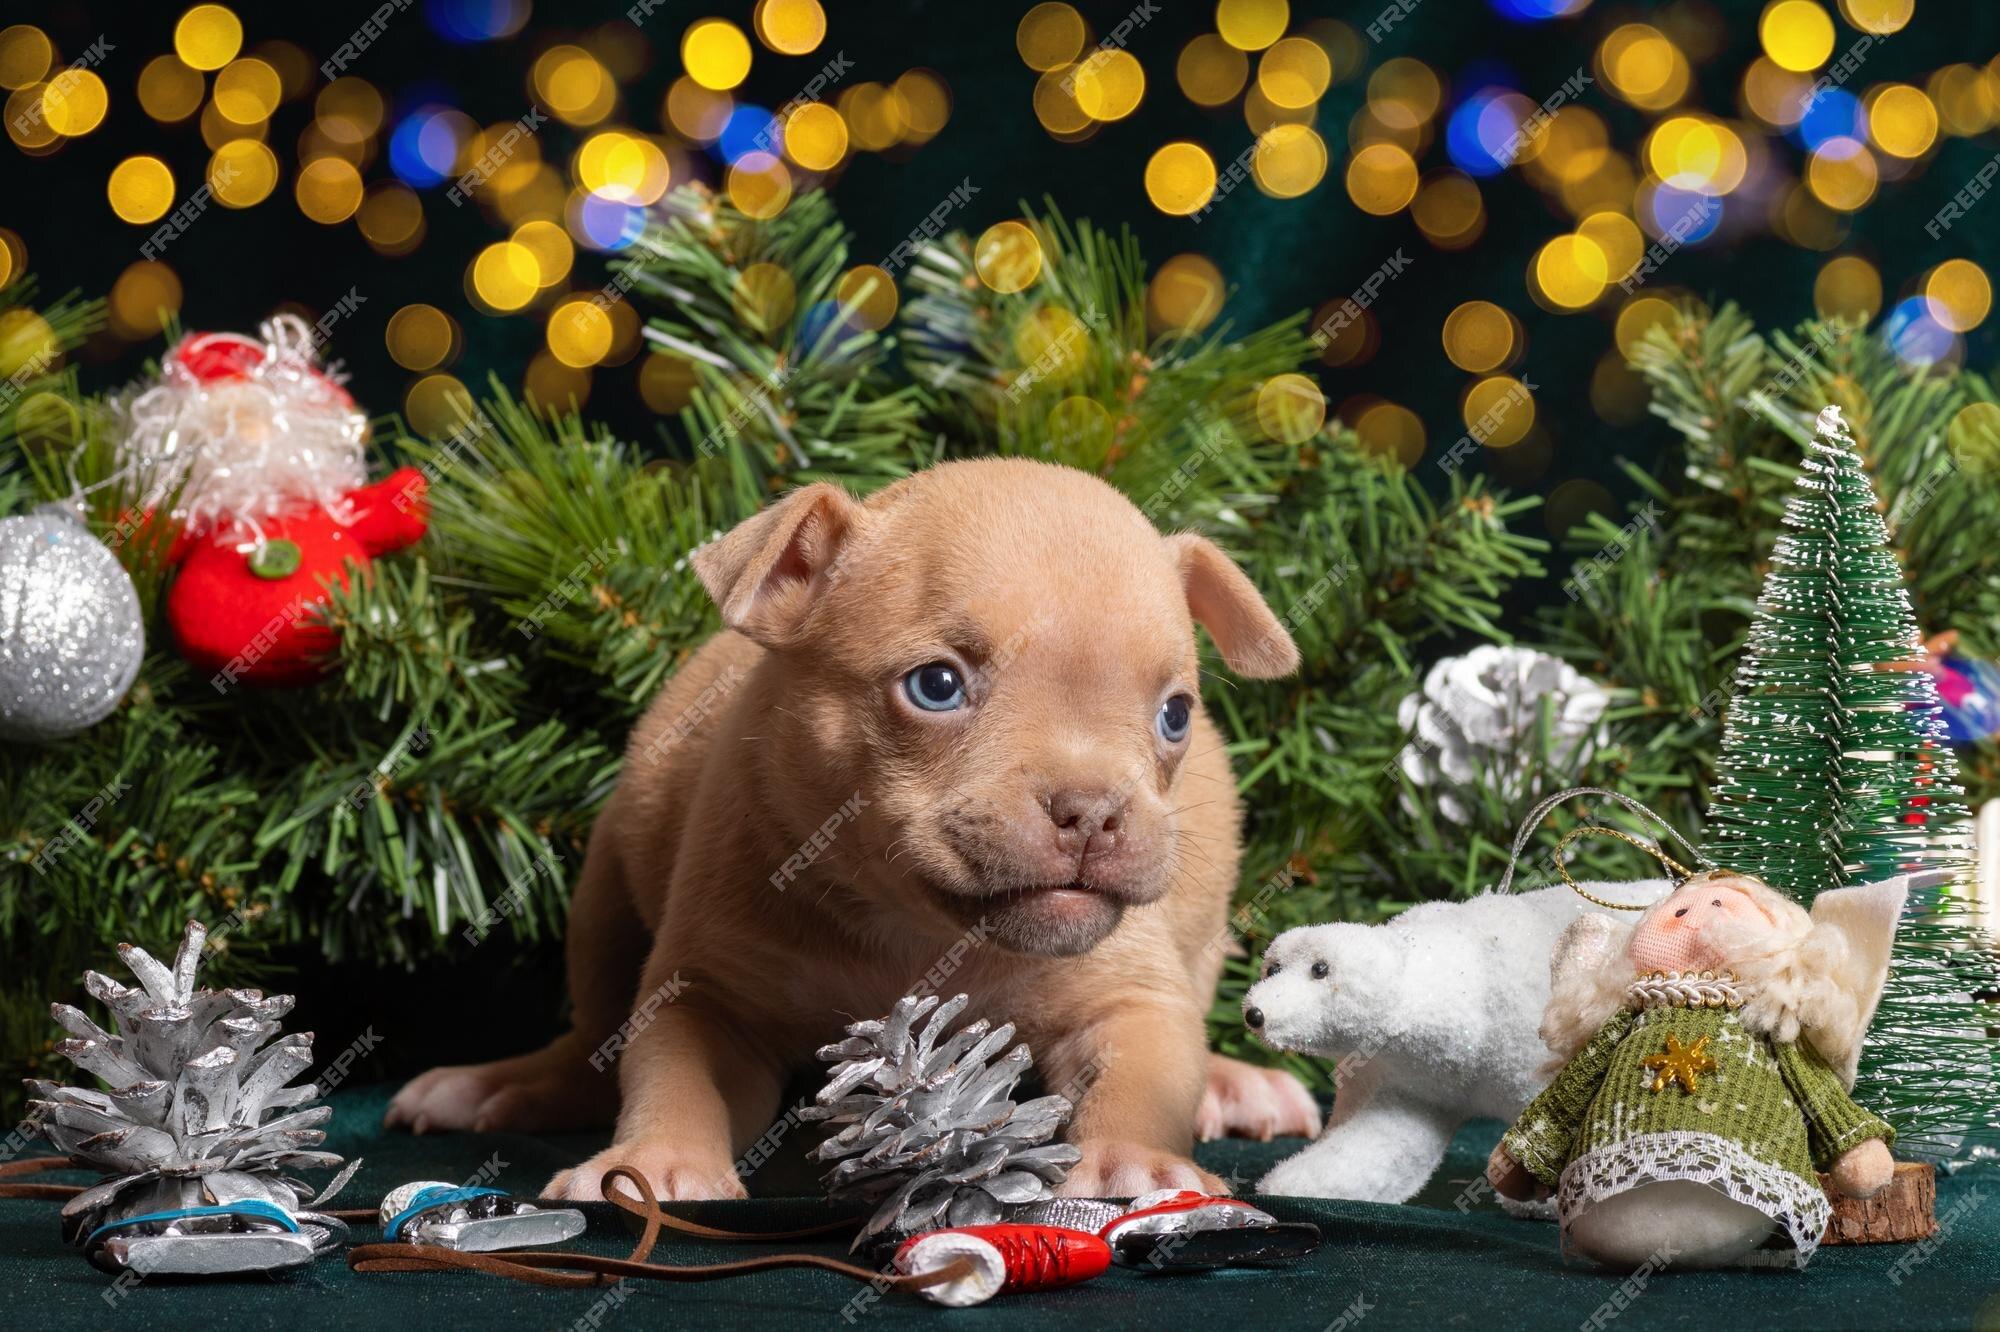 Premium Photo Little Cute American Bully Puppy Next To A